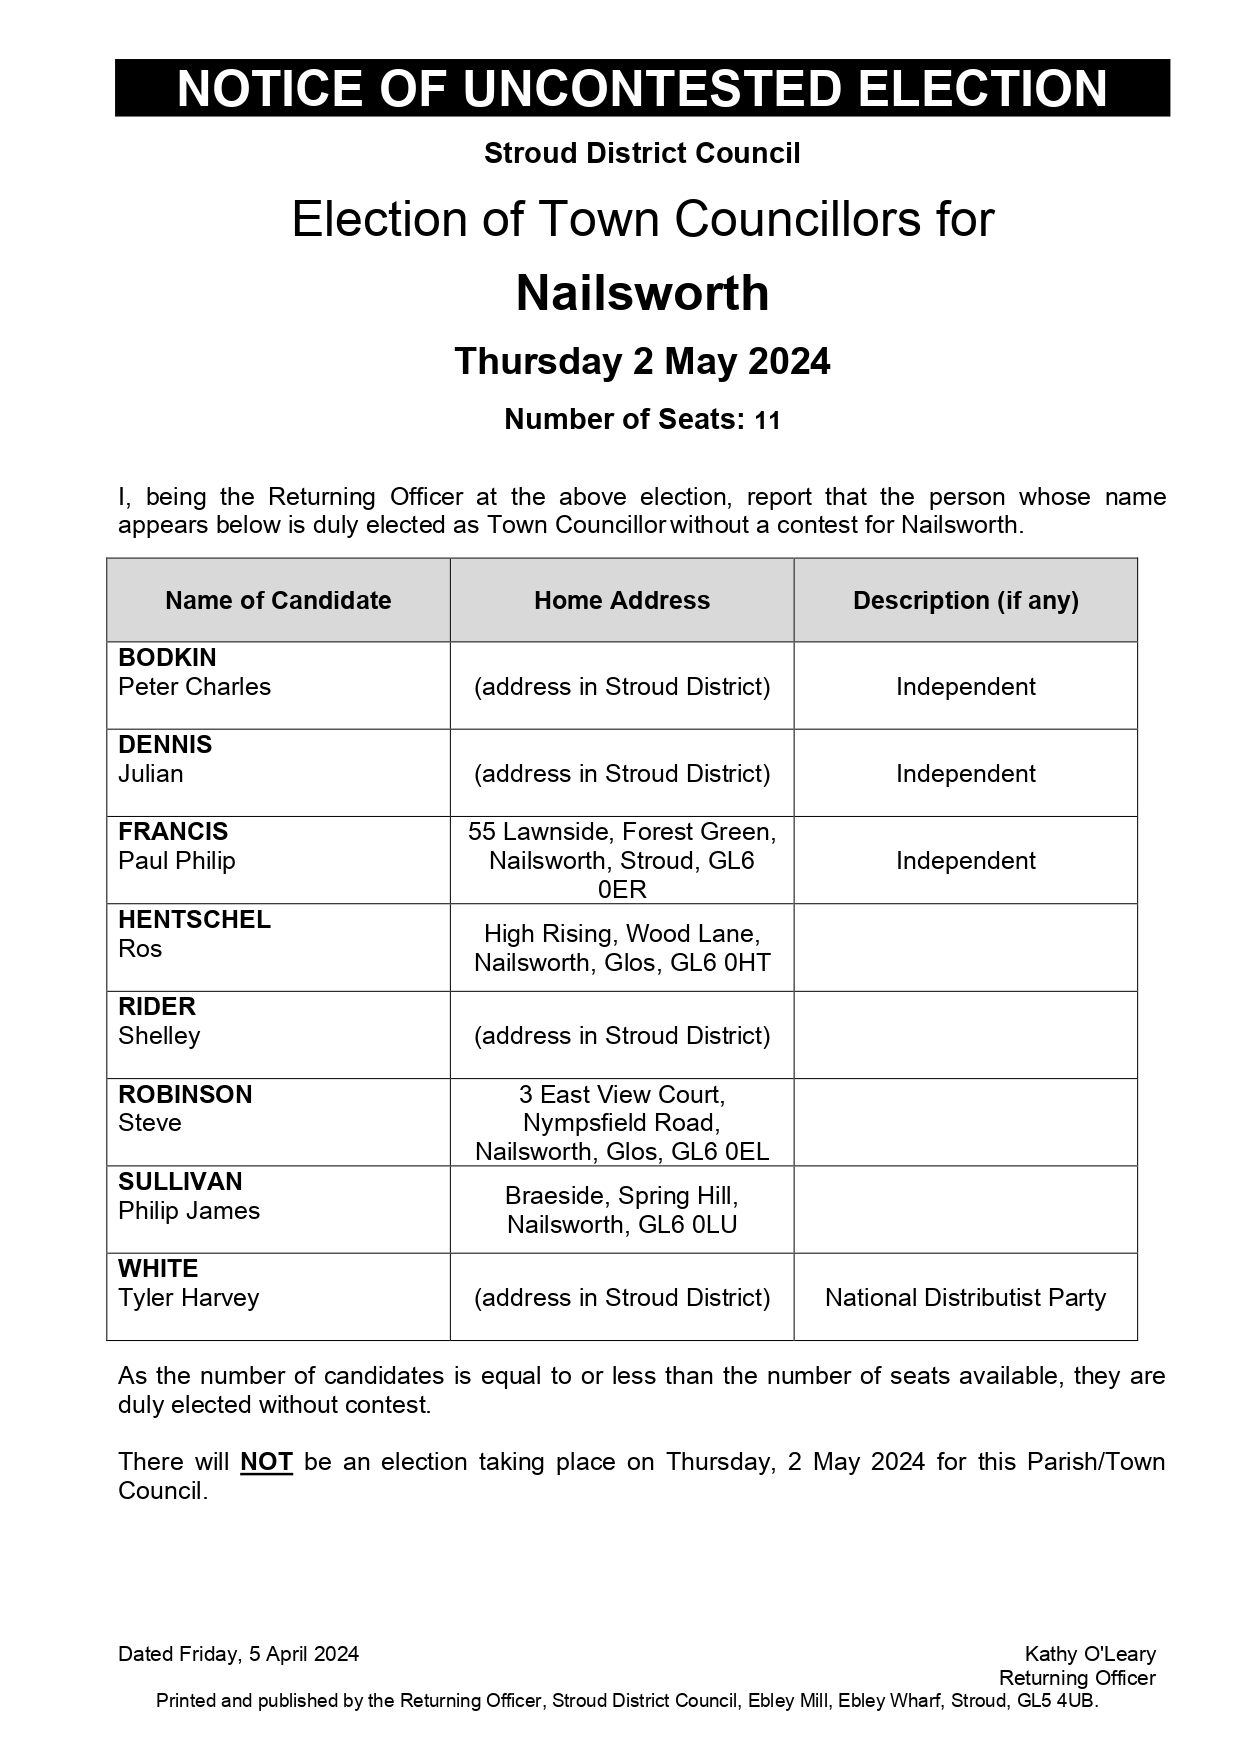 Nailsworth-notice-of-uncontested-election 2024.jpg